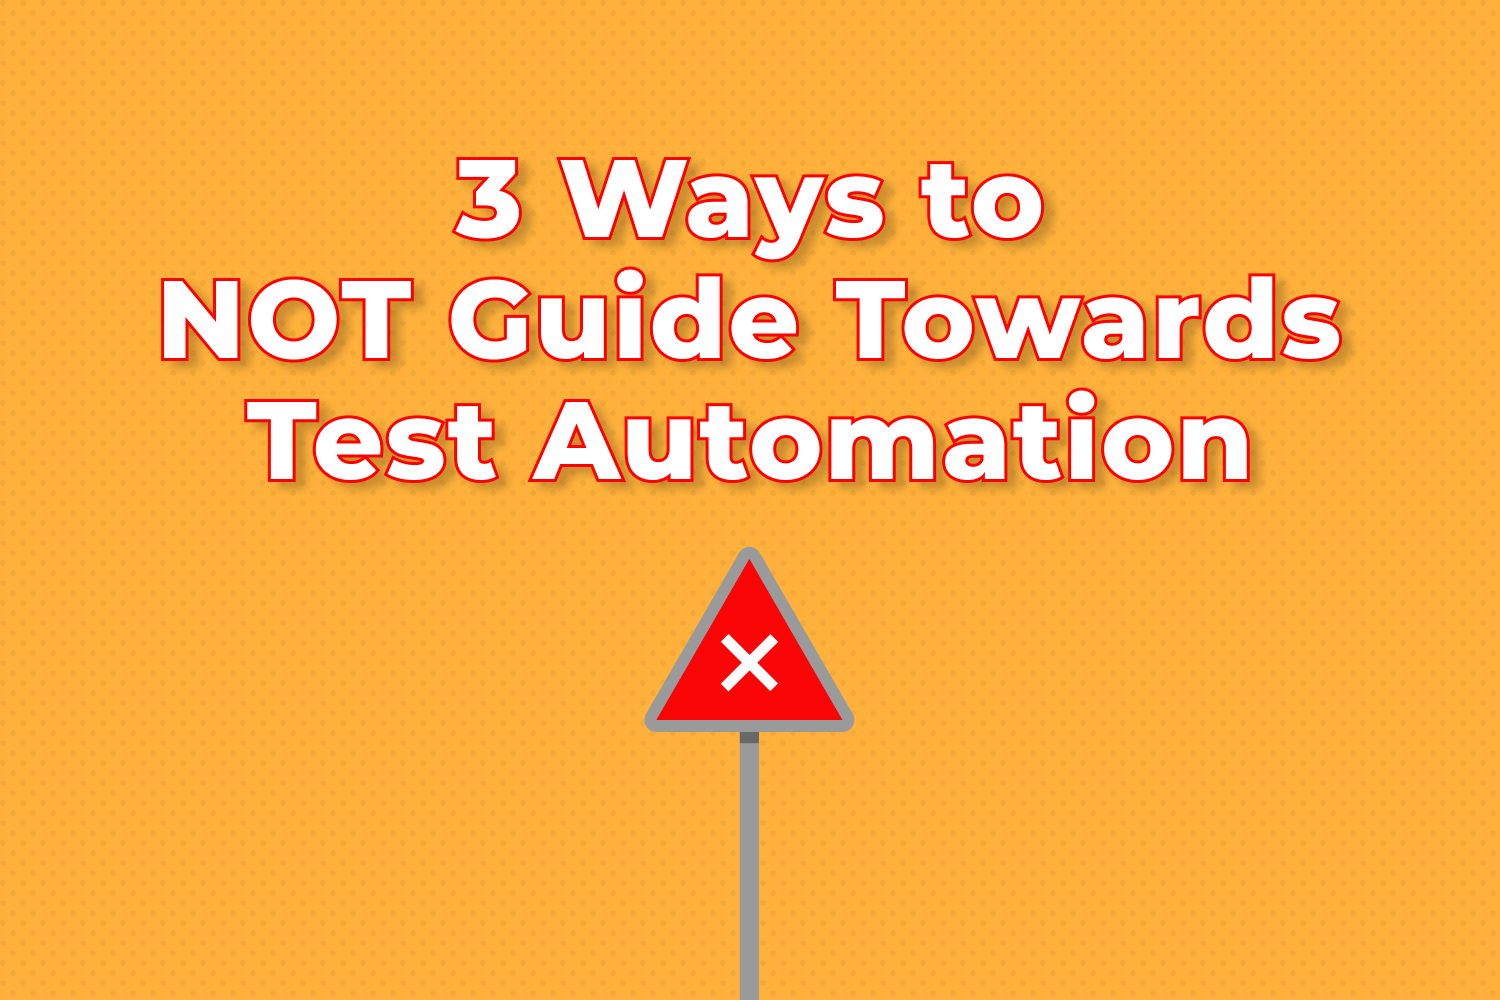 3 Ways to NOT Guide Towards Test Automation